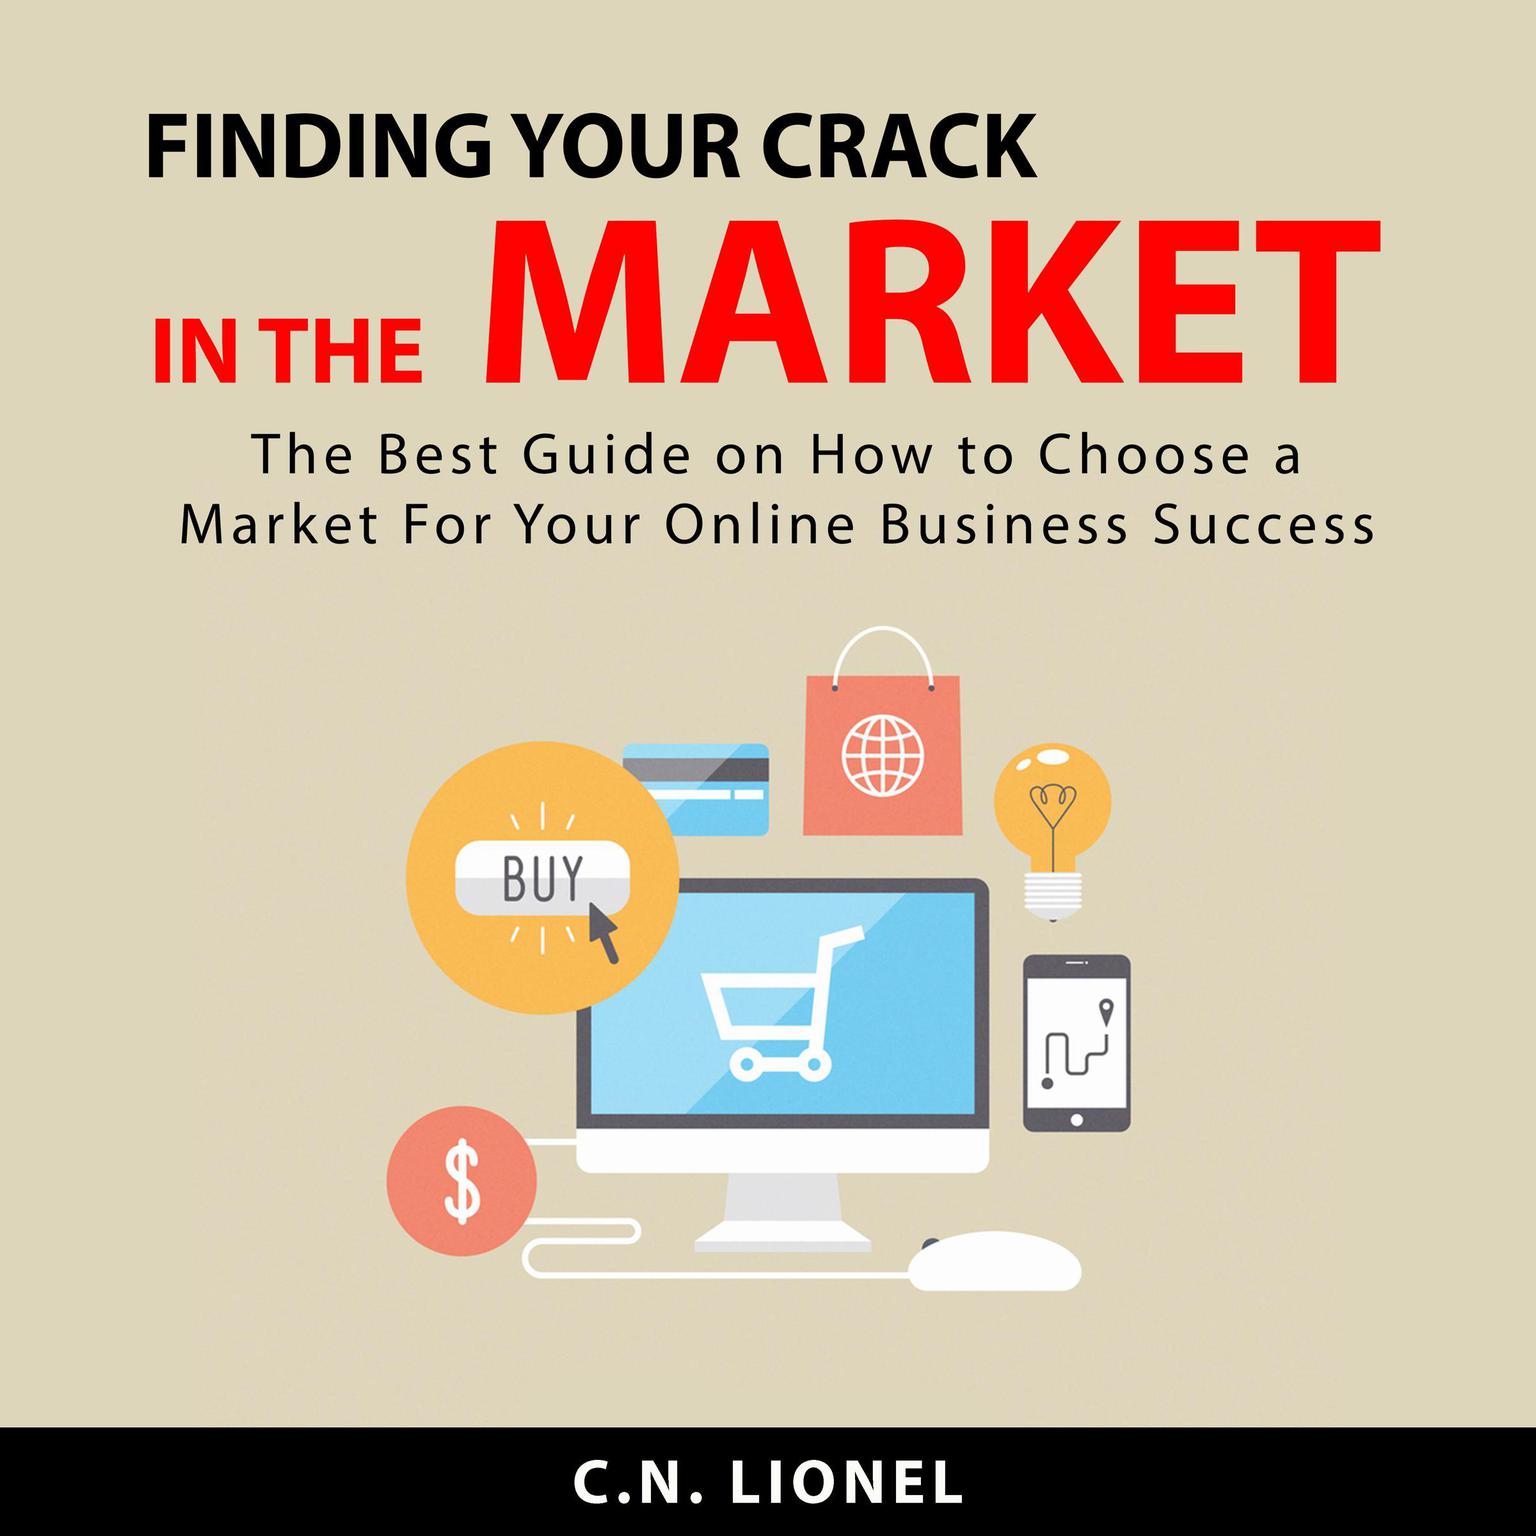 Finding Your Crack In The Market: The Best Guide on How to Choose a Profitable Niche Market For Your Online Business Success Audiobook, by C.N. Lionel